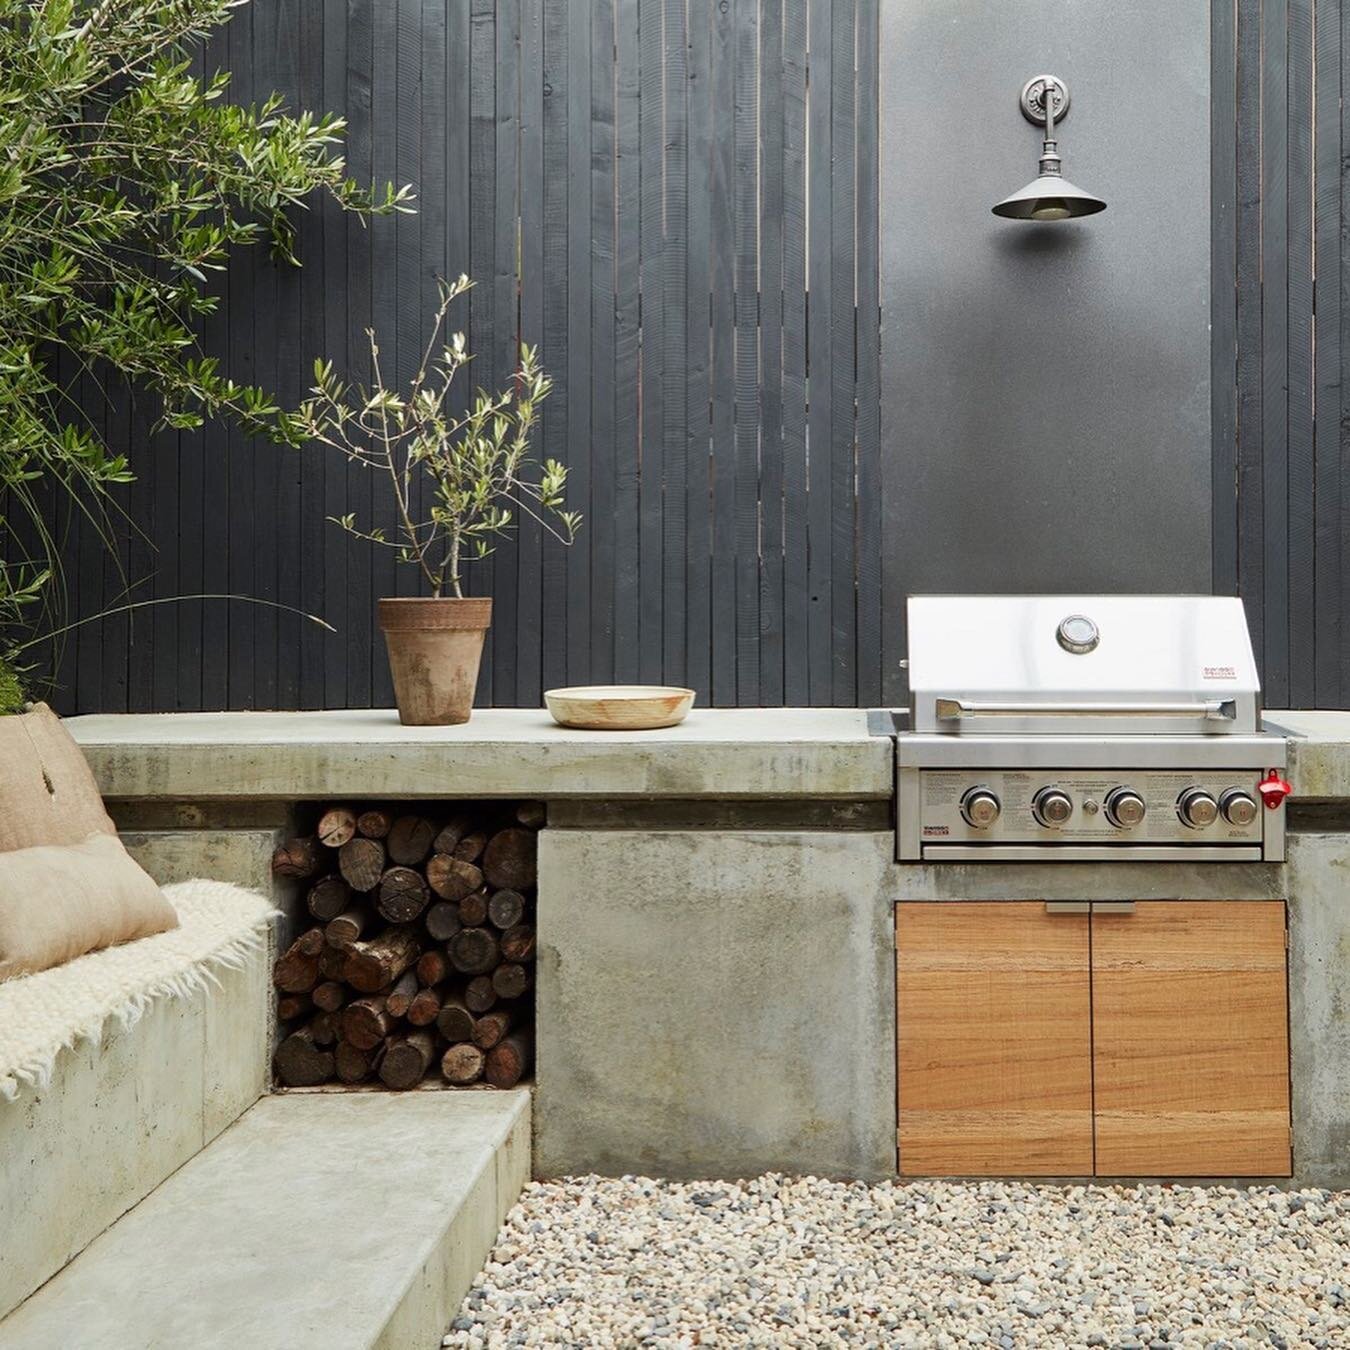 Is it a garden if there aren&rsquo;t many plants? Yes. Simple materials were able to transform this garden in to a minimalist oasis, perfect for a Labor Day BBQ. 
#ThinkOutsideDesign #landscapedesign #bbq #gardendesign